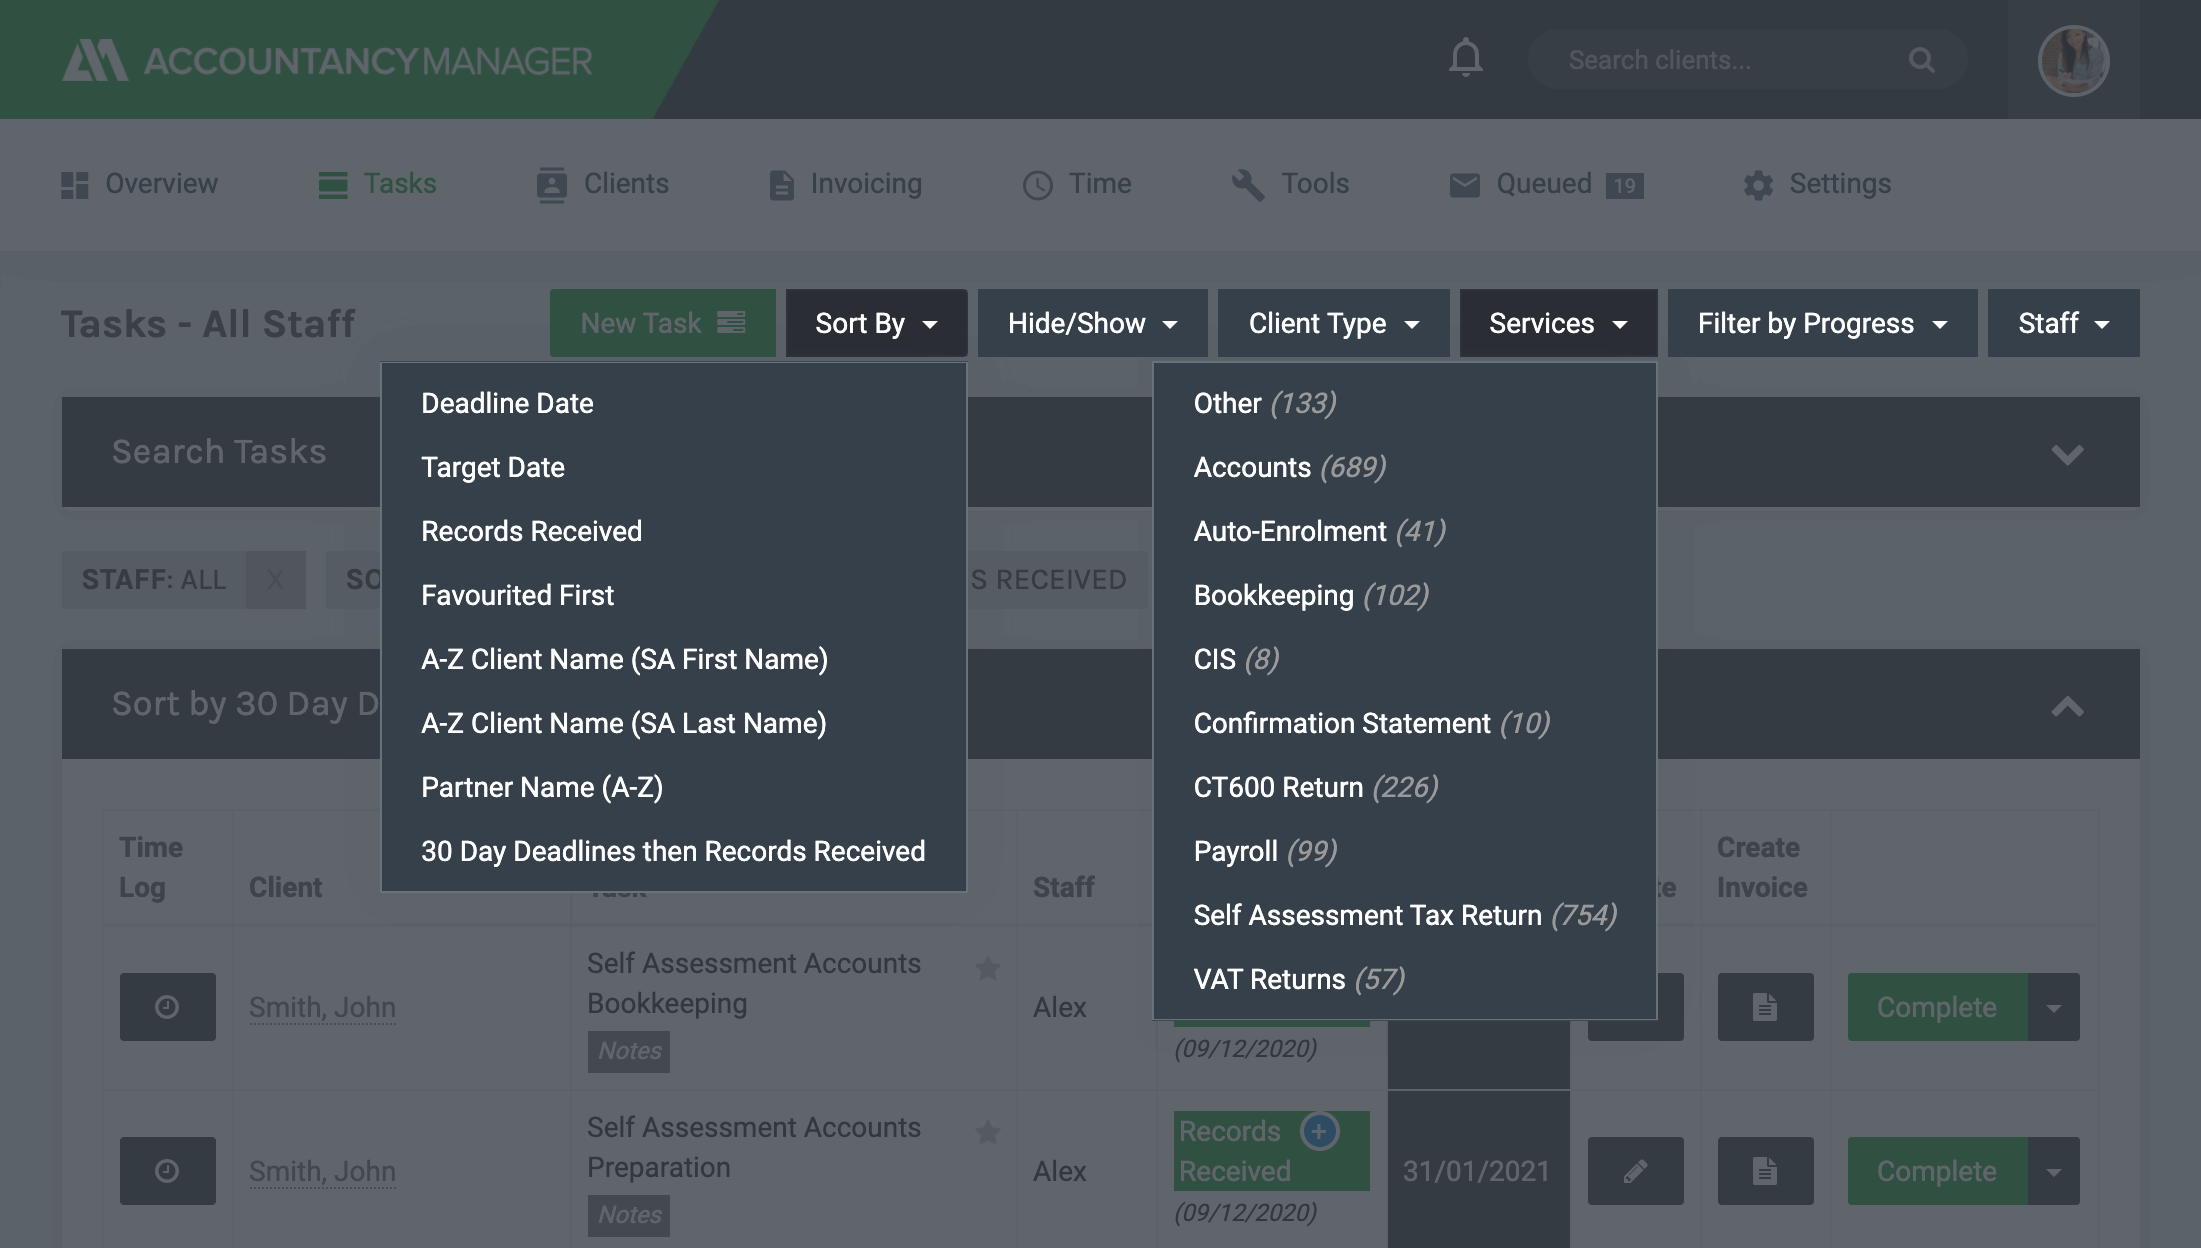 Tasks: Plan your day, your way